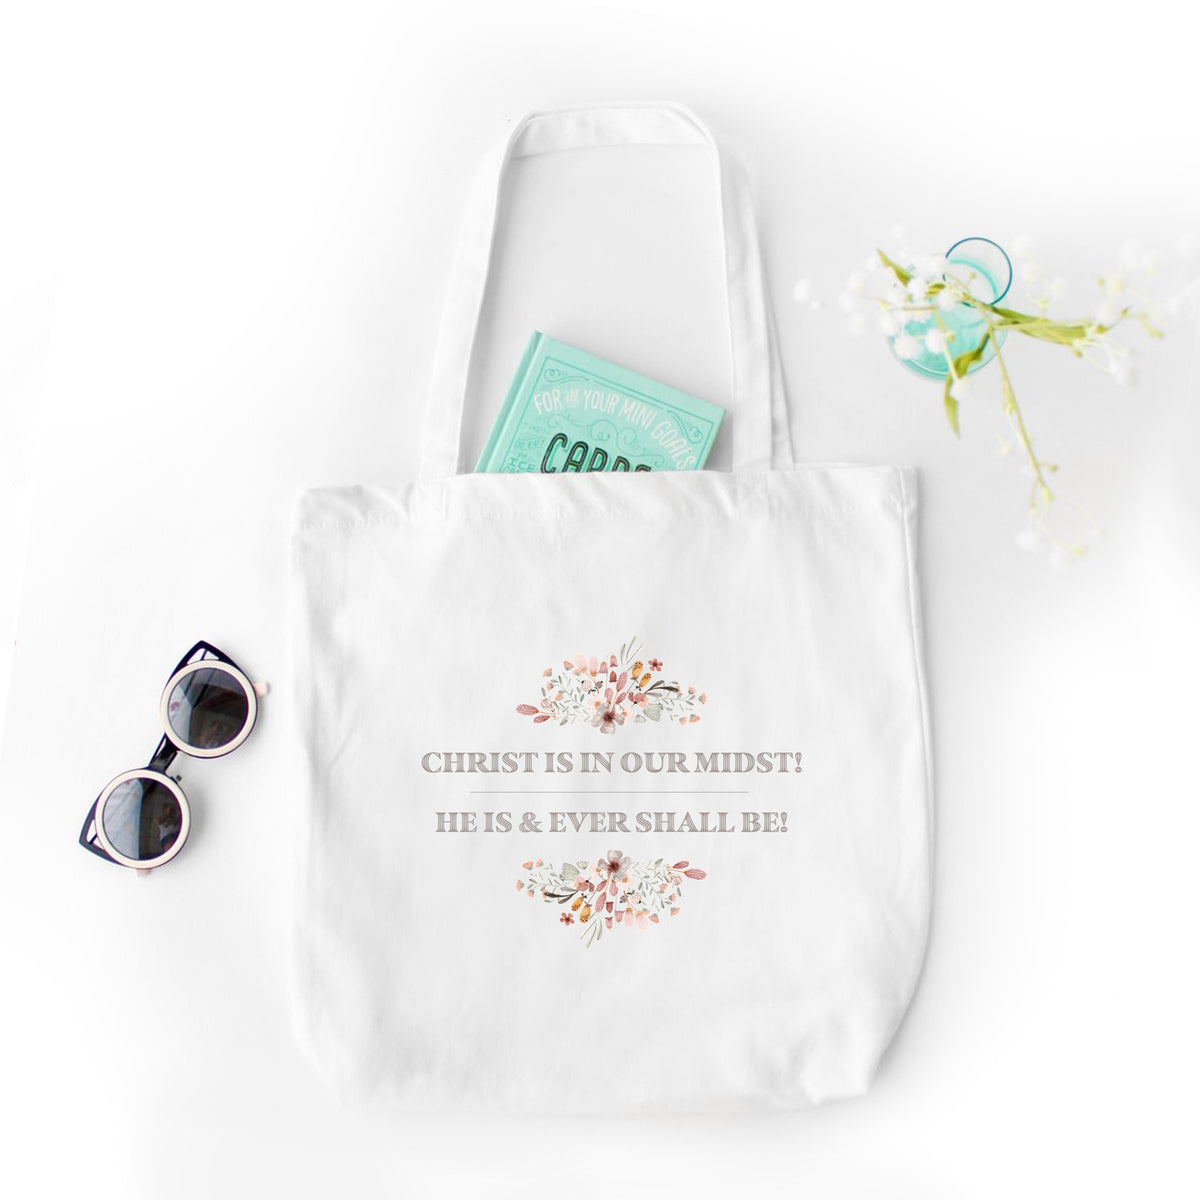 Christ is in Our Midst Tote Bag